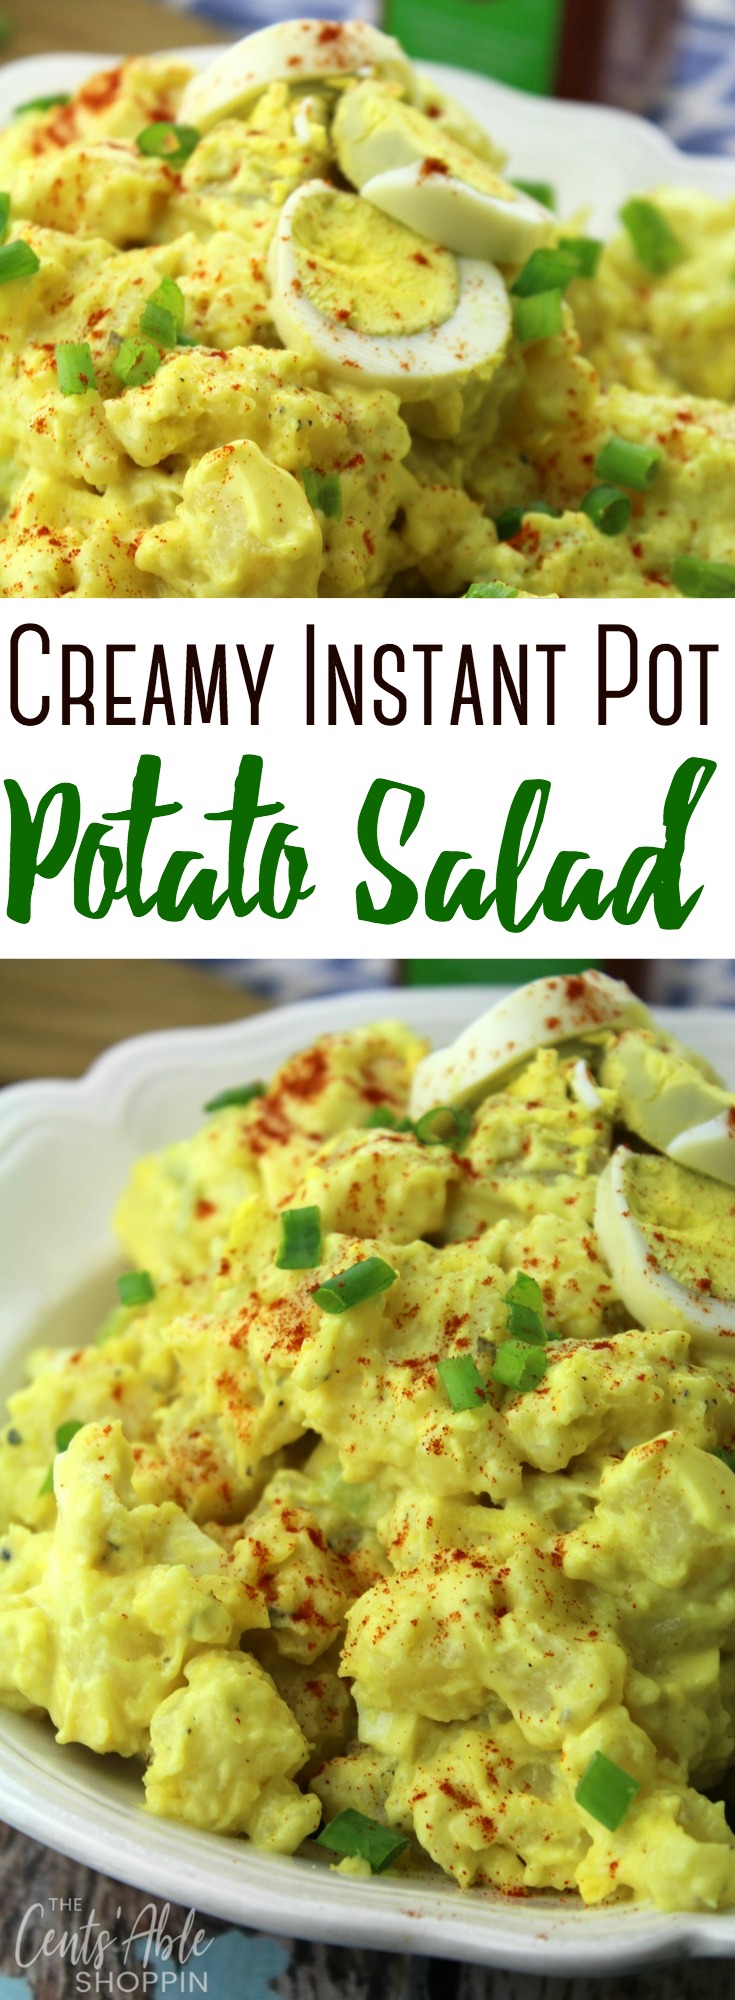 Make this easy Instant Pot Potato Salad - a quick and easy recipe for the most delicious potato salad that'll be a hit at the dinner table!